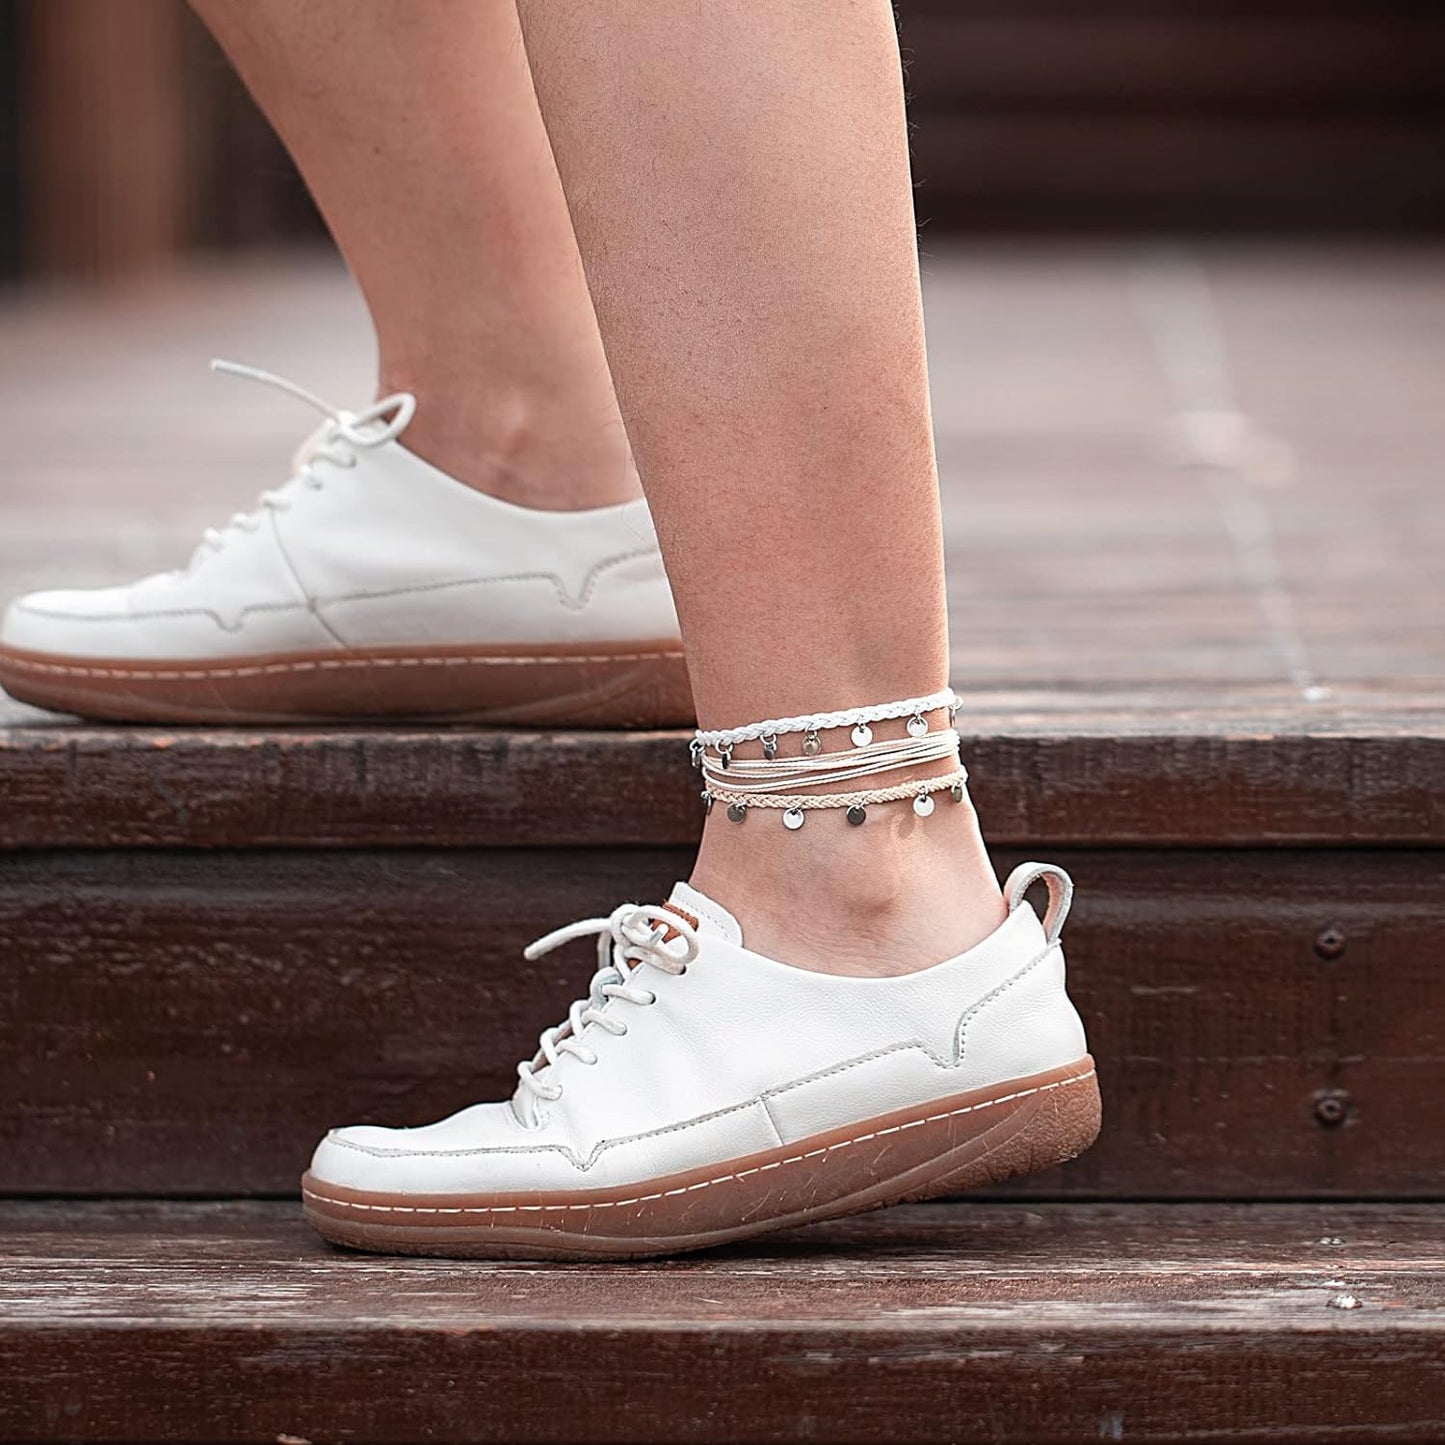 String Ankle Bracelets Waterproof Rope Anklets Braided Beach Boho Coin Anklets Cute Friendship Foot Jewelry for Women Teen Girls